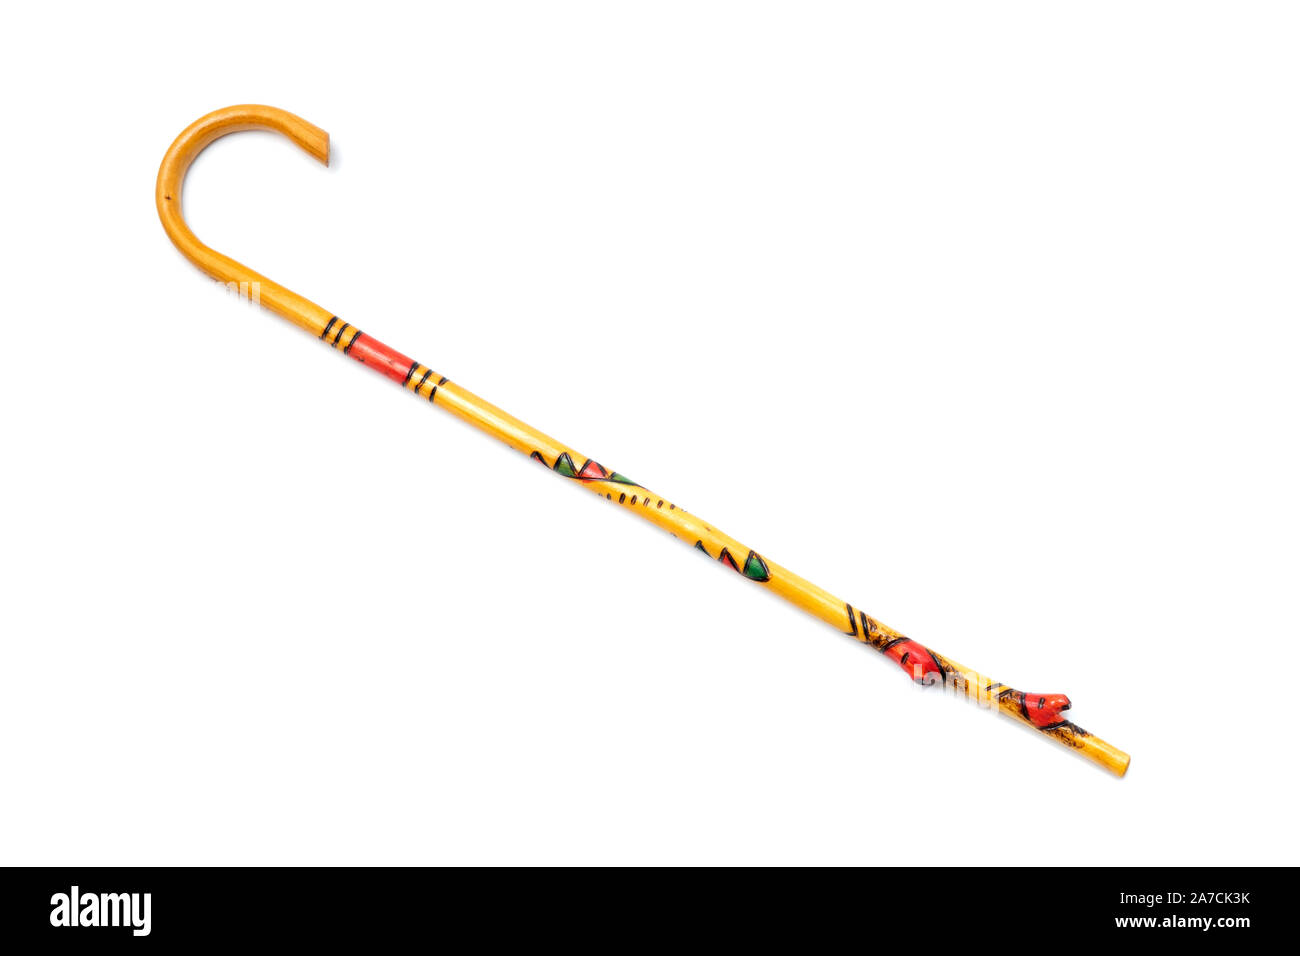 The walking Stick is the most popular tourist souvenir from Sigulda, Latvia Stock Photo